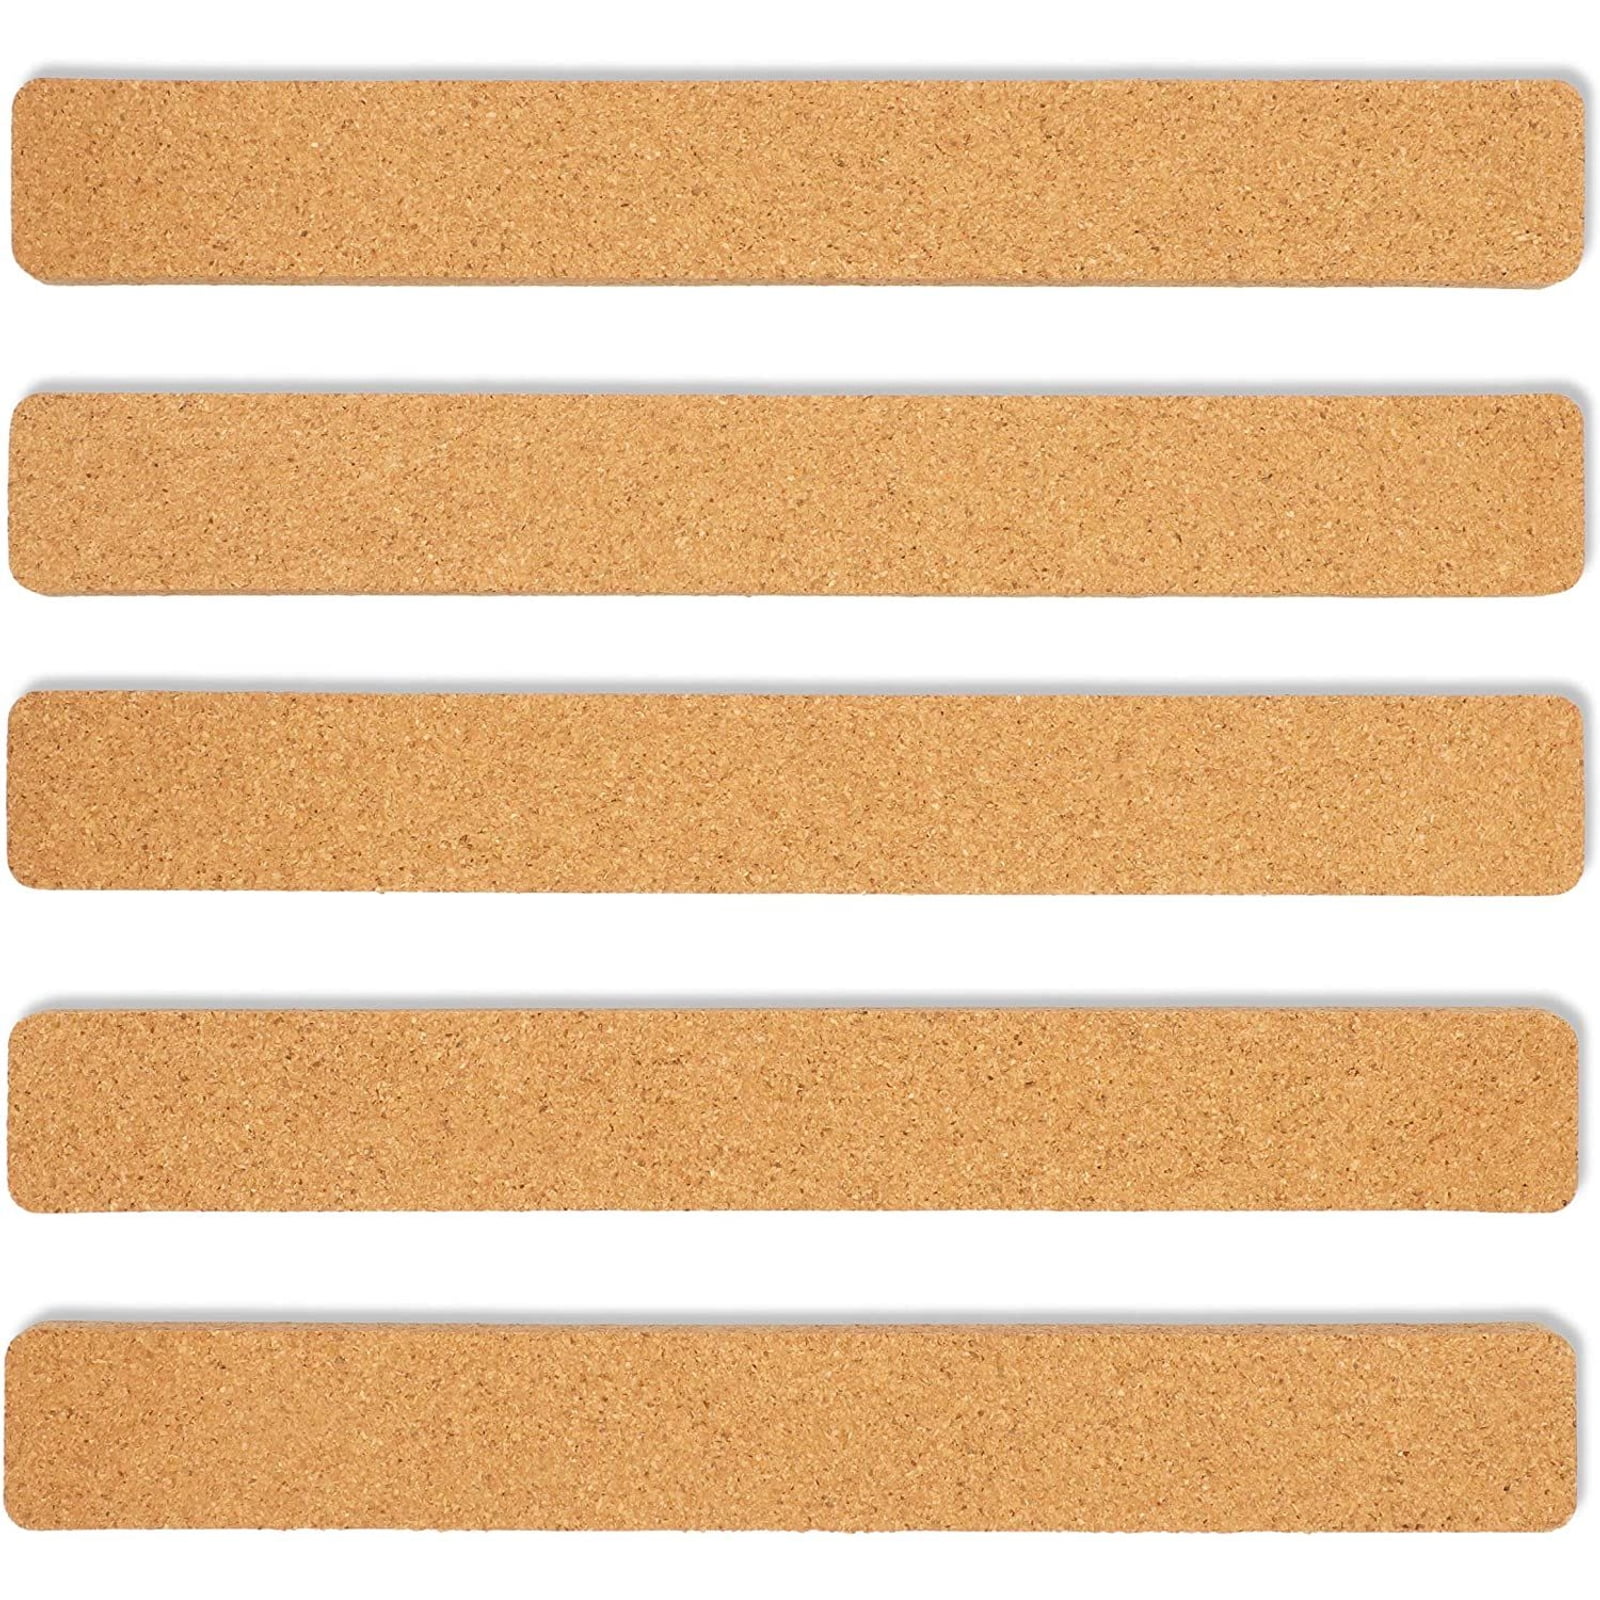 100% Natural Frameless Cork Board Strips with 50 Multi-Color Push Pins HBlife Cork Bulletin Bar Strip 15 x 2-1/2 Thick 4 Pack Strong Self Adhesive Backing 